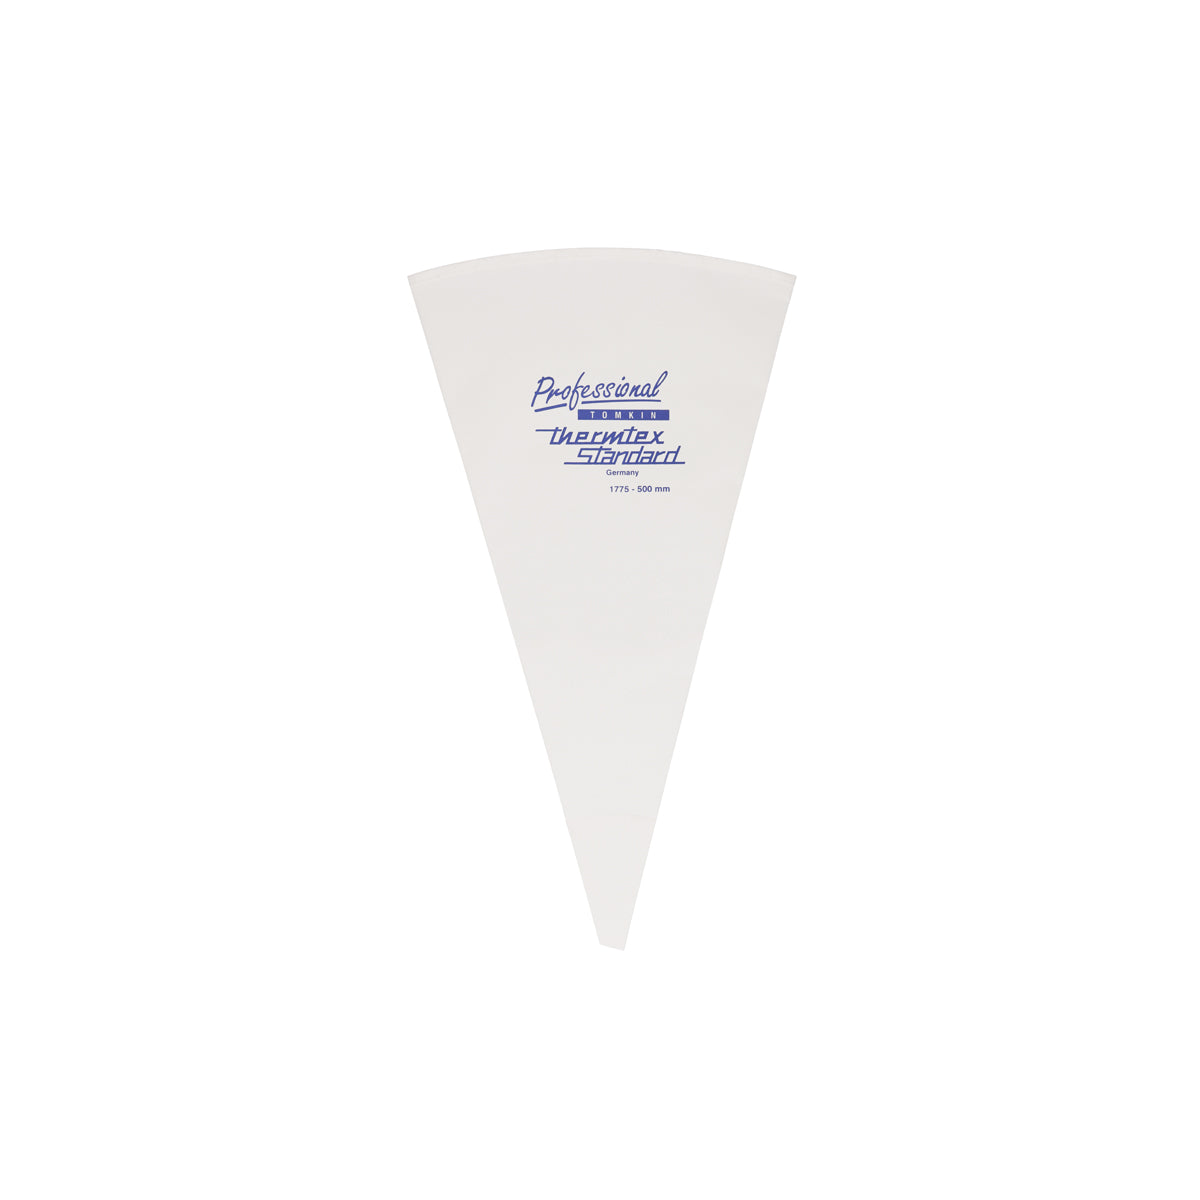 01775 Thermohauser Standard Pastry Bag 500mm Tomkin Australia Hospitality Supplies